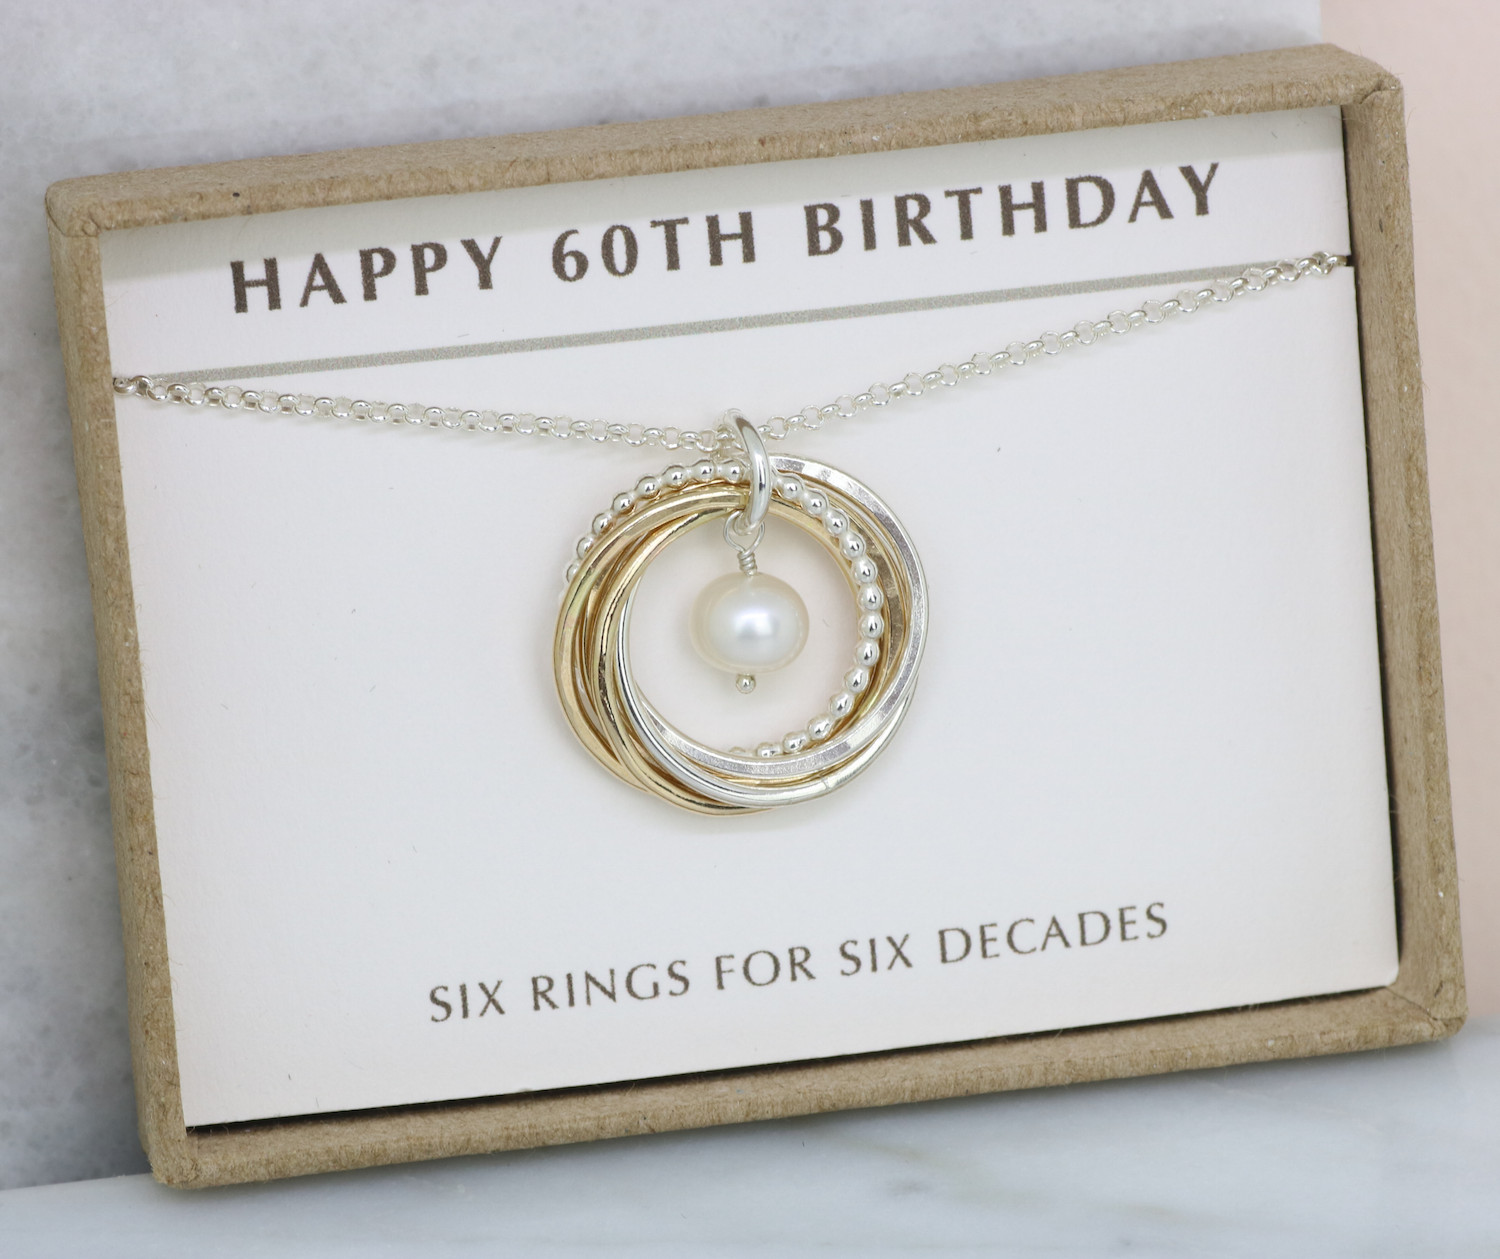 60Th Birthday Gift Ideas For Women
 60th Birthday Necklace with Birthstone